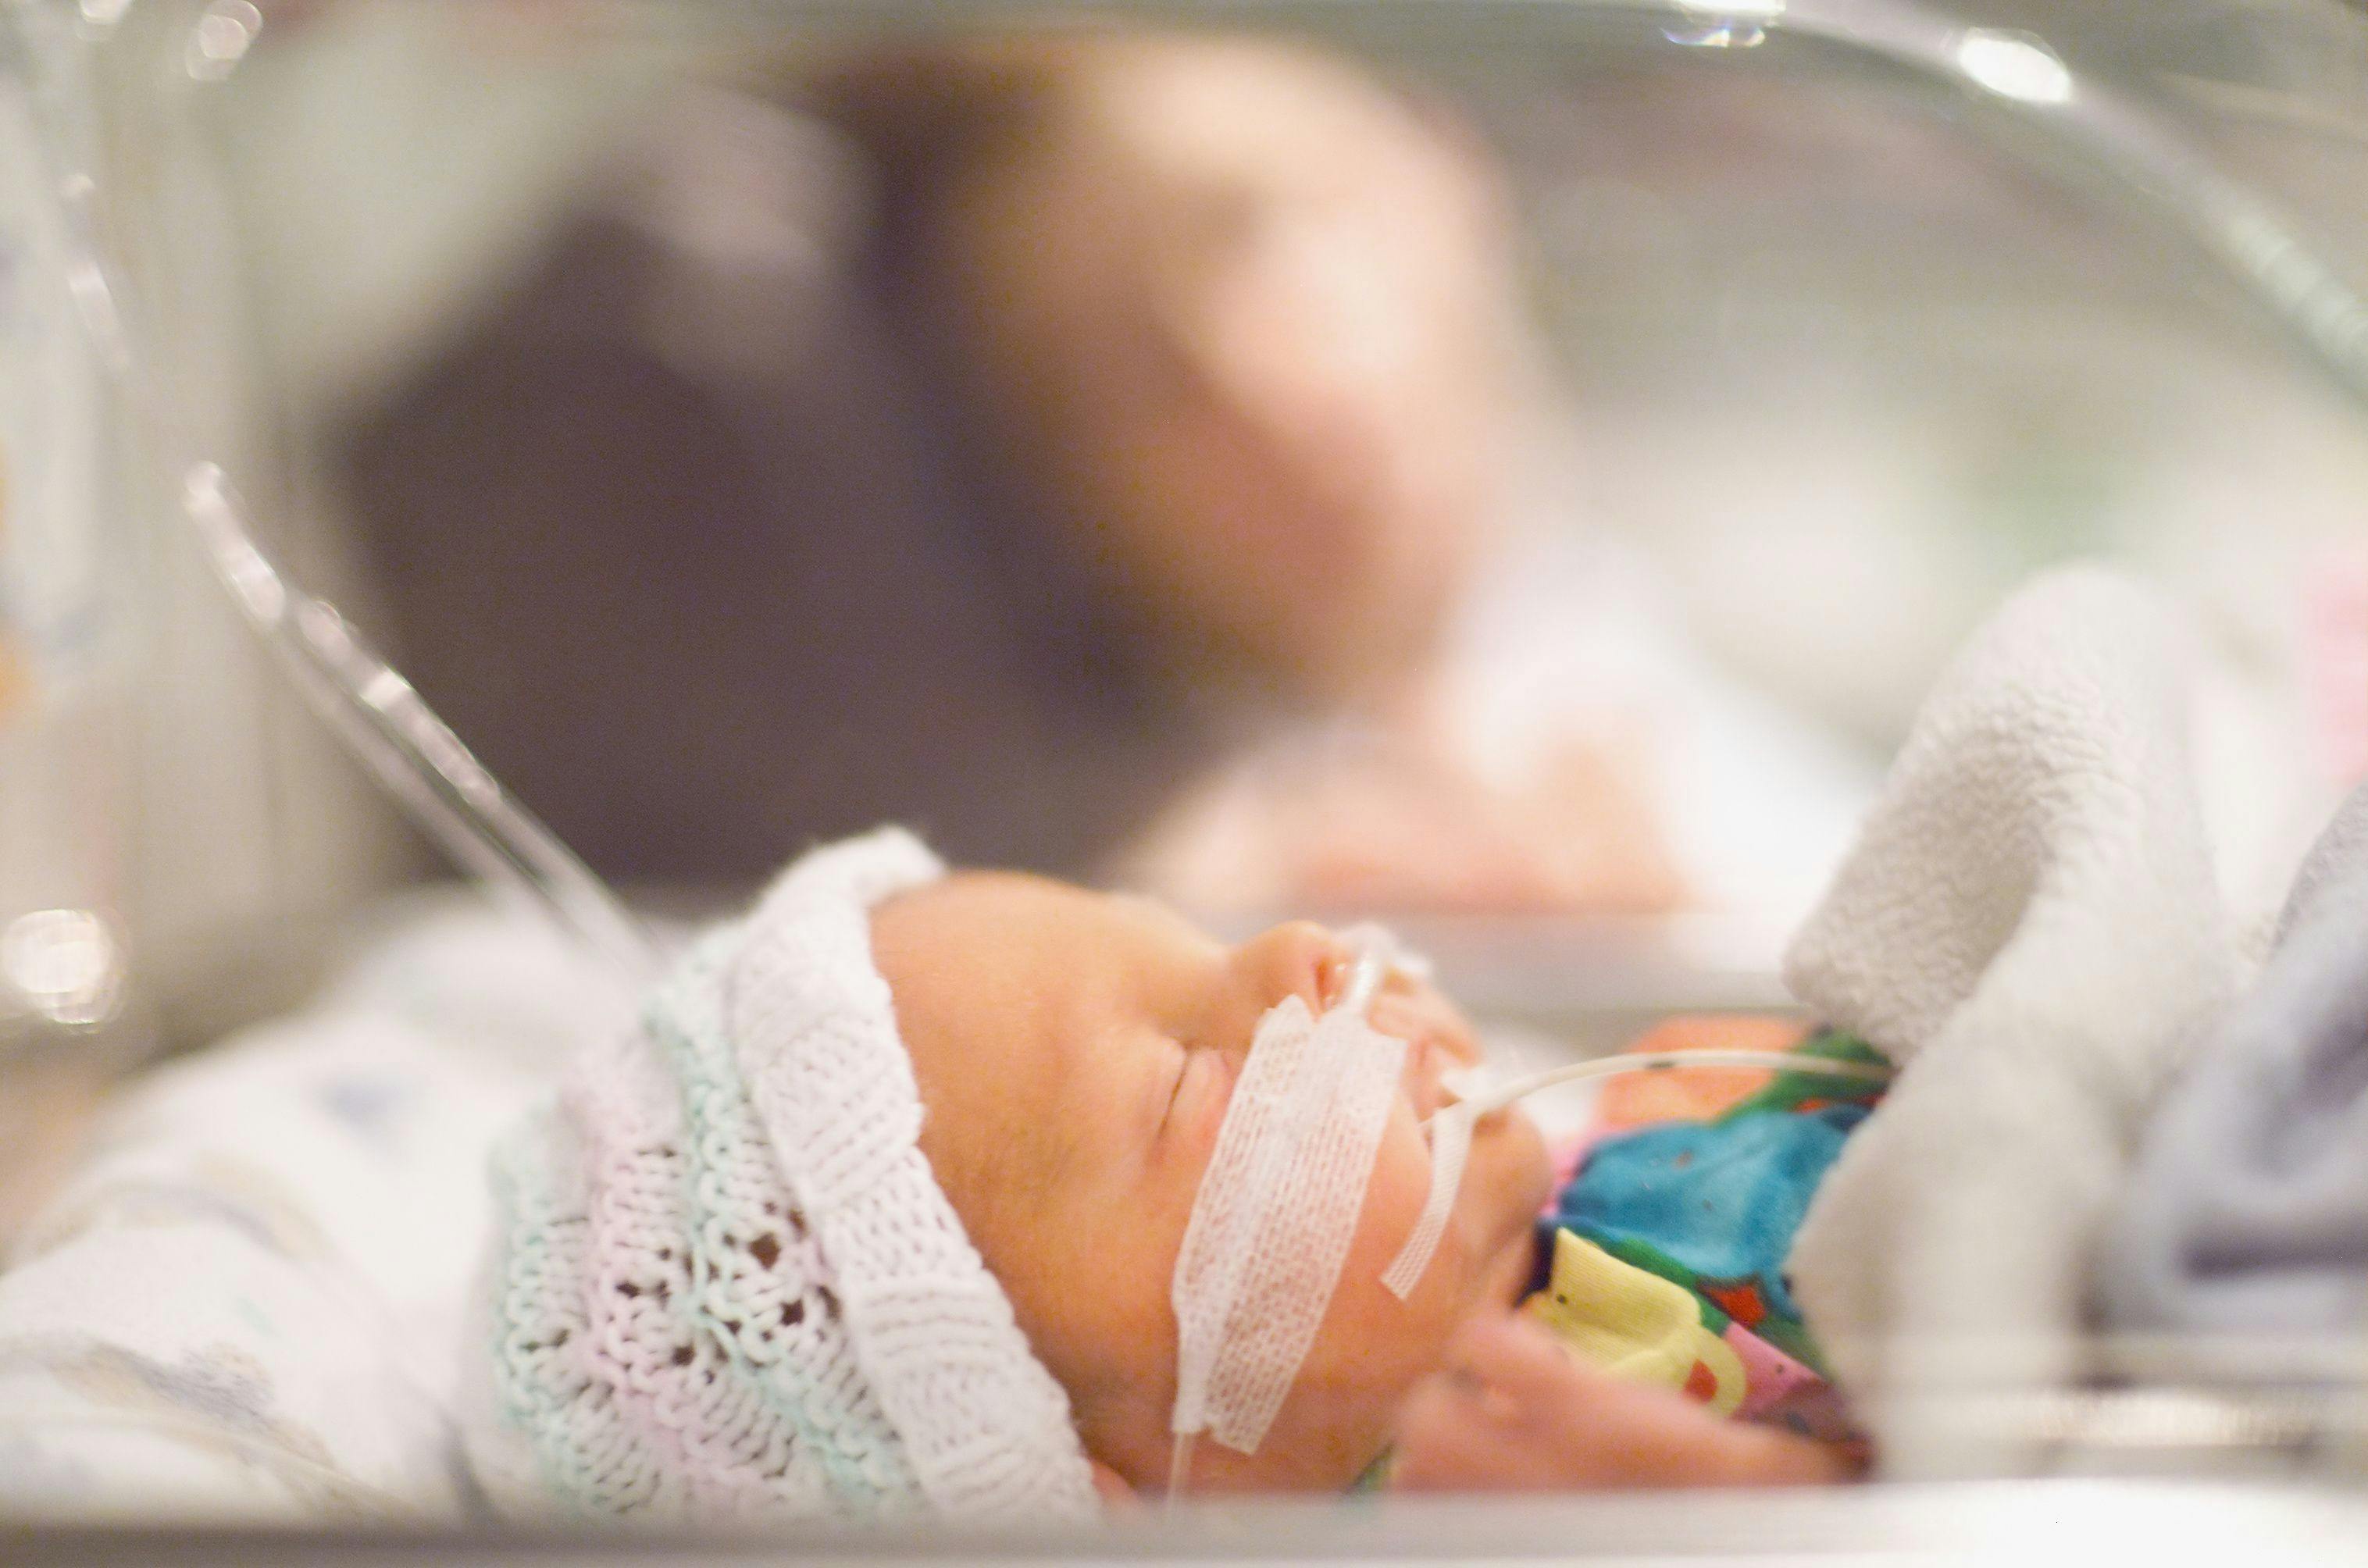 Aflibercept injection approved by FDA to treat preterm infants diagnosed with ROP